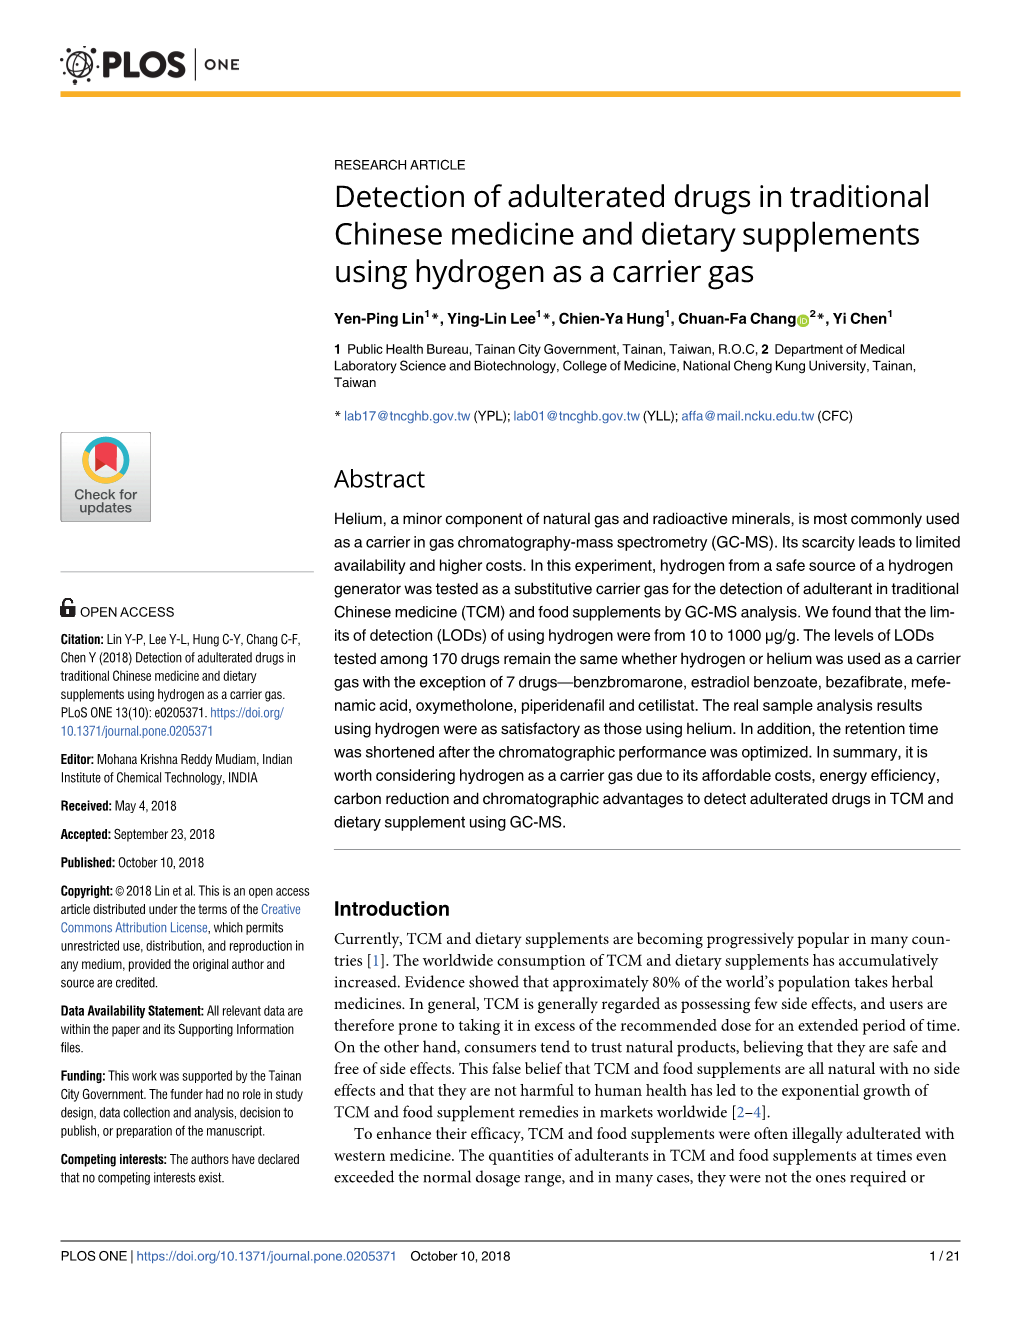 Detection of Adulterated Drugs in Traditional Chinese Medicine and Dietary Supplements Using Hydrogen As a Carrier Gas